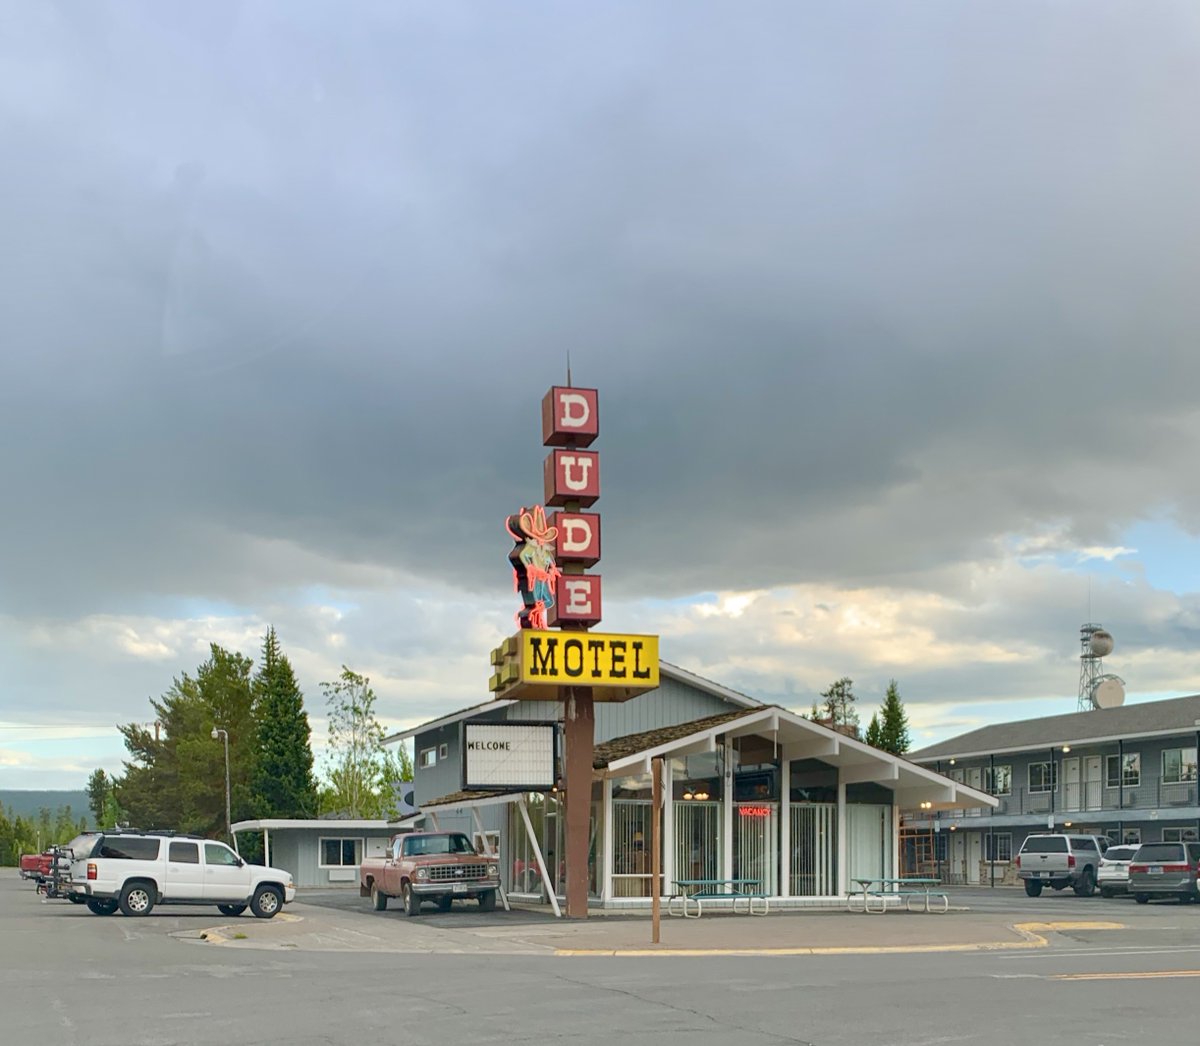 16/ We then sprinted to West Yellowstone to visit the park the next day. You don't need my camera-phone wildlife photos, so instead here is (a) a panorama of the valley in eastern Idaho we drove through; (b) a funny sign; and (c) a great mid-century motel sign in West Yellowstone